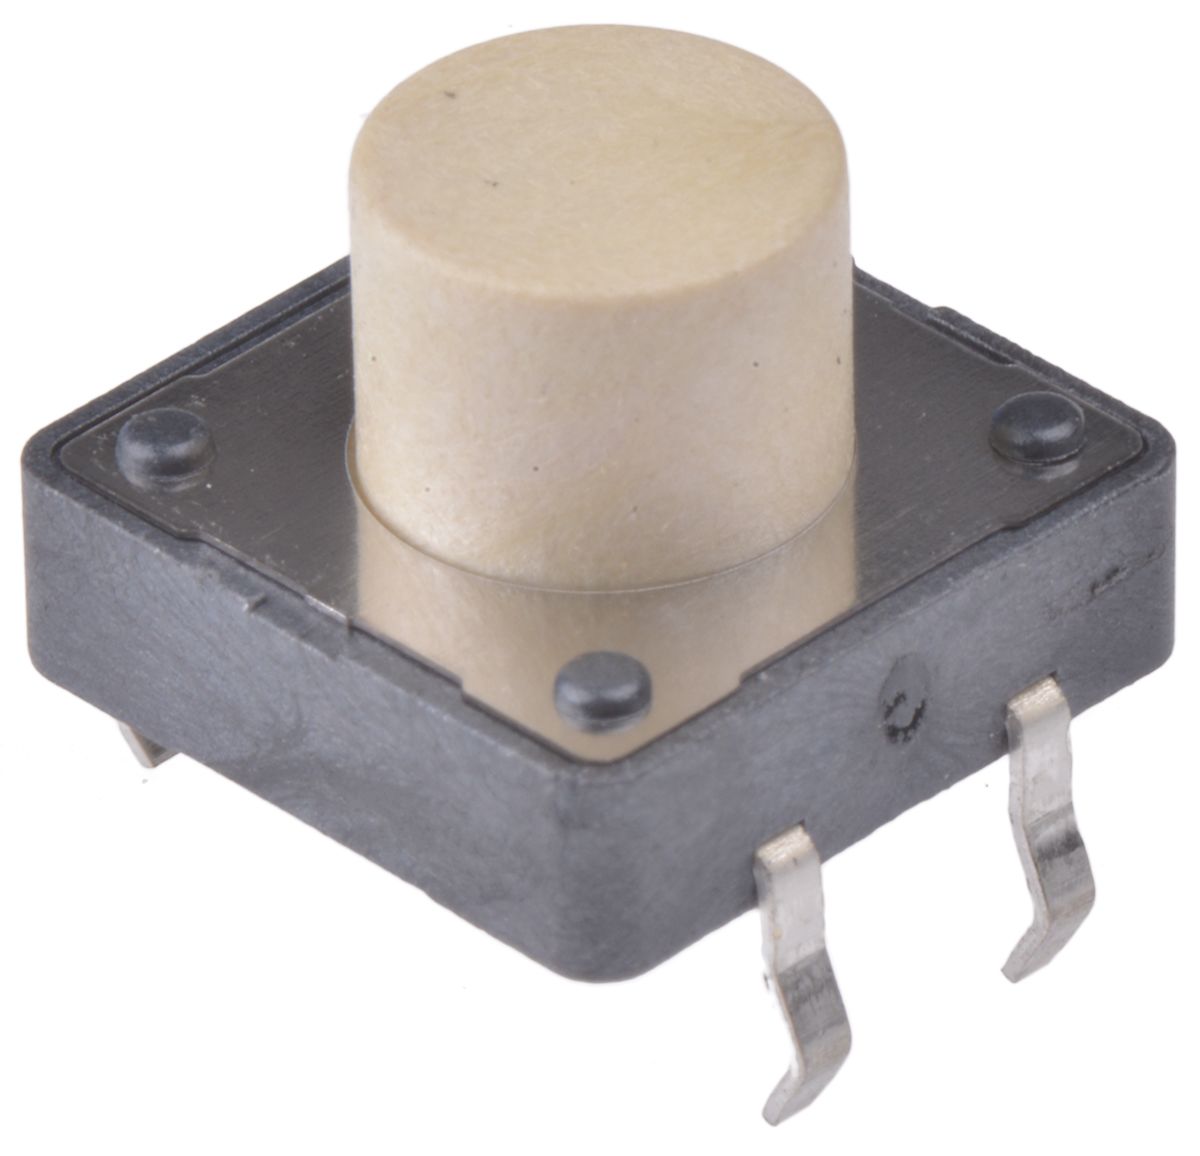 White Button Tactile Switch, Single Pole Single Throw (SPST) 50 mA @ 12 V dc 5mm Through Hole